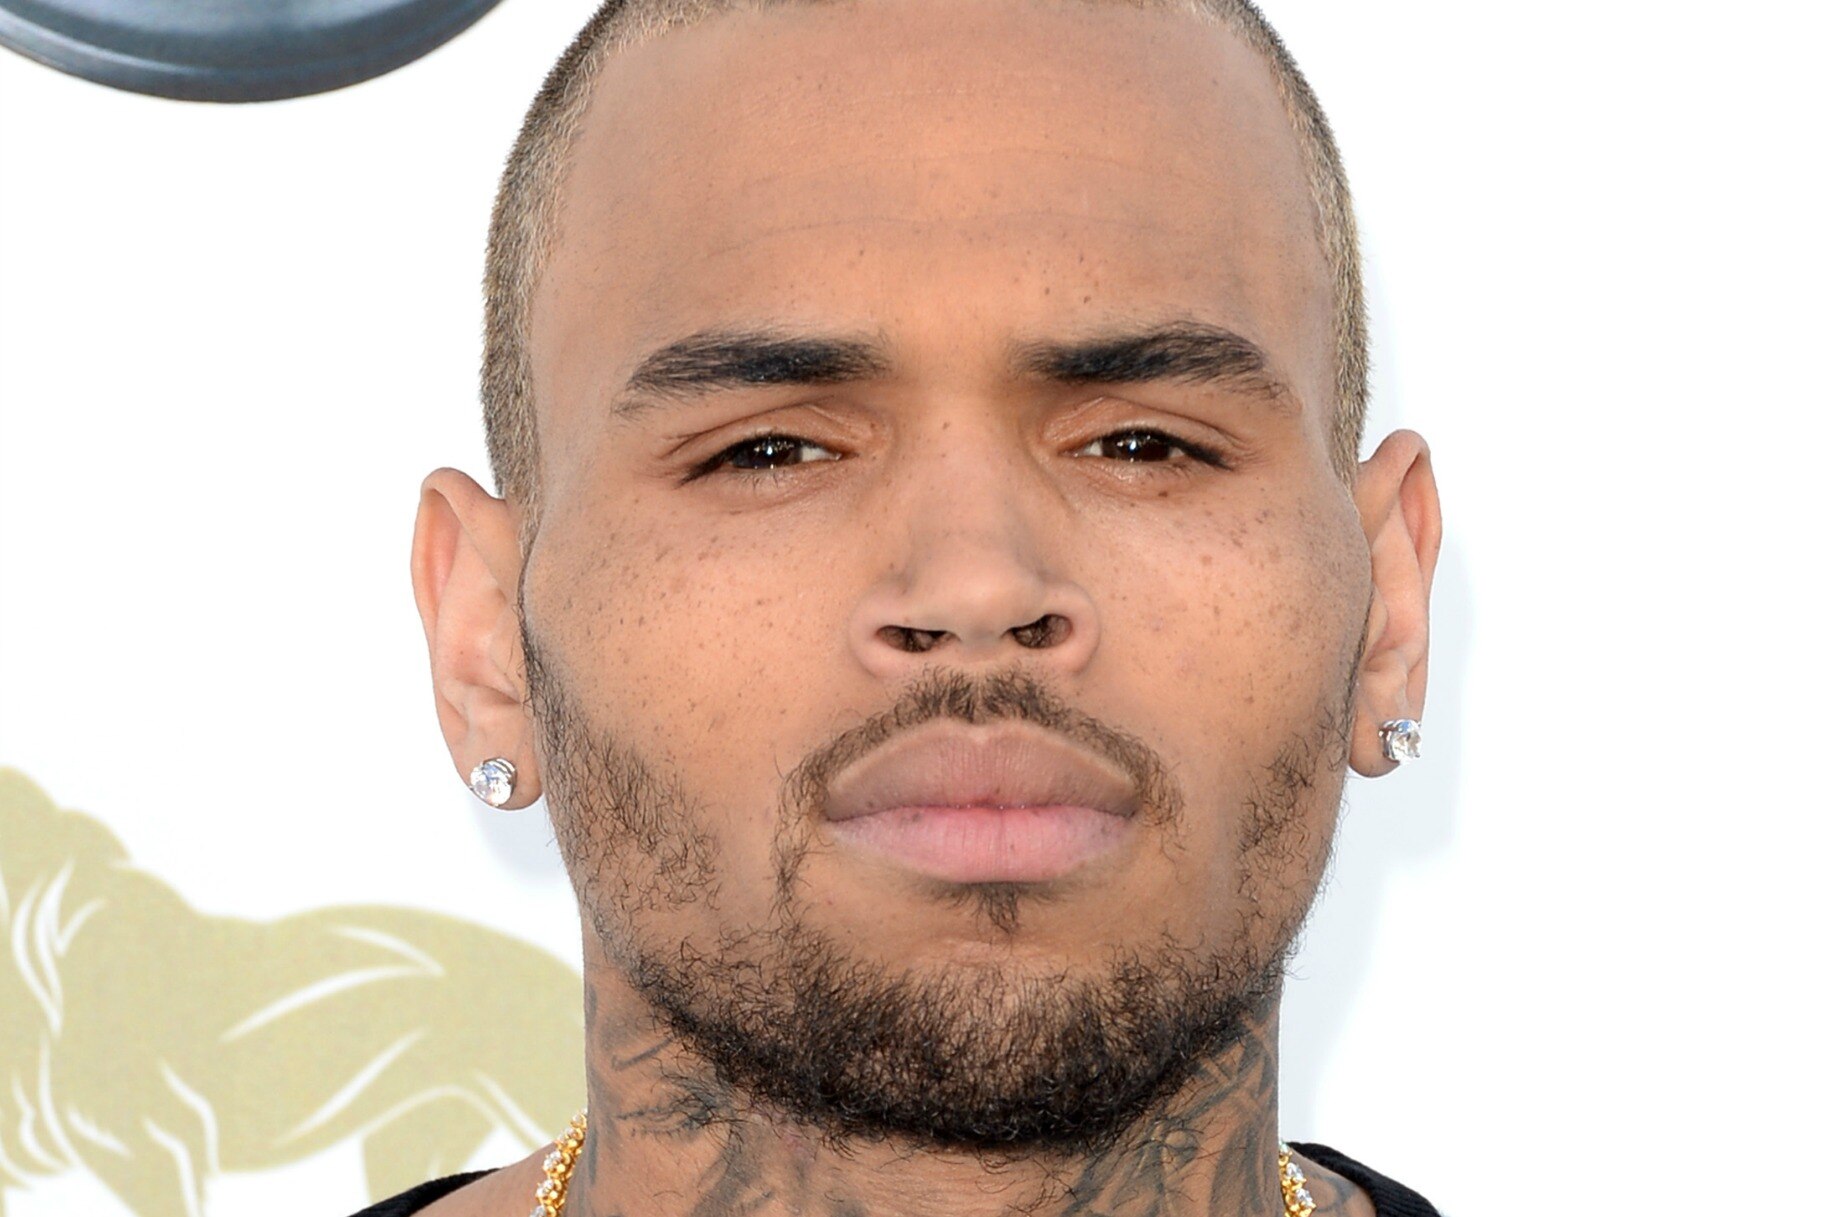 A New Profile On Chris Brown Alleges He Has Serious Drugs And